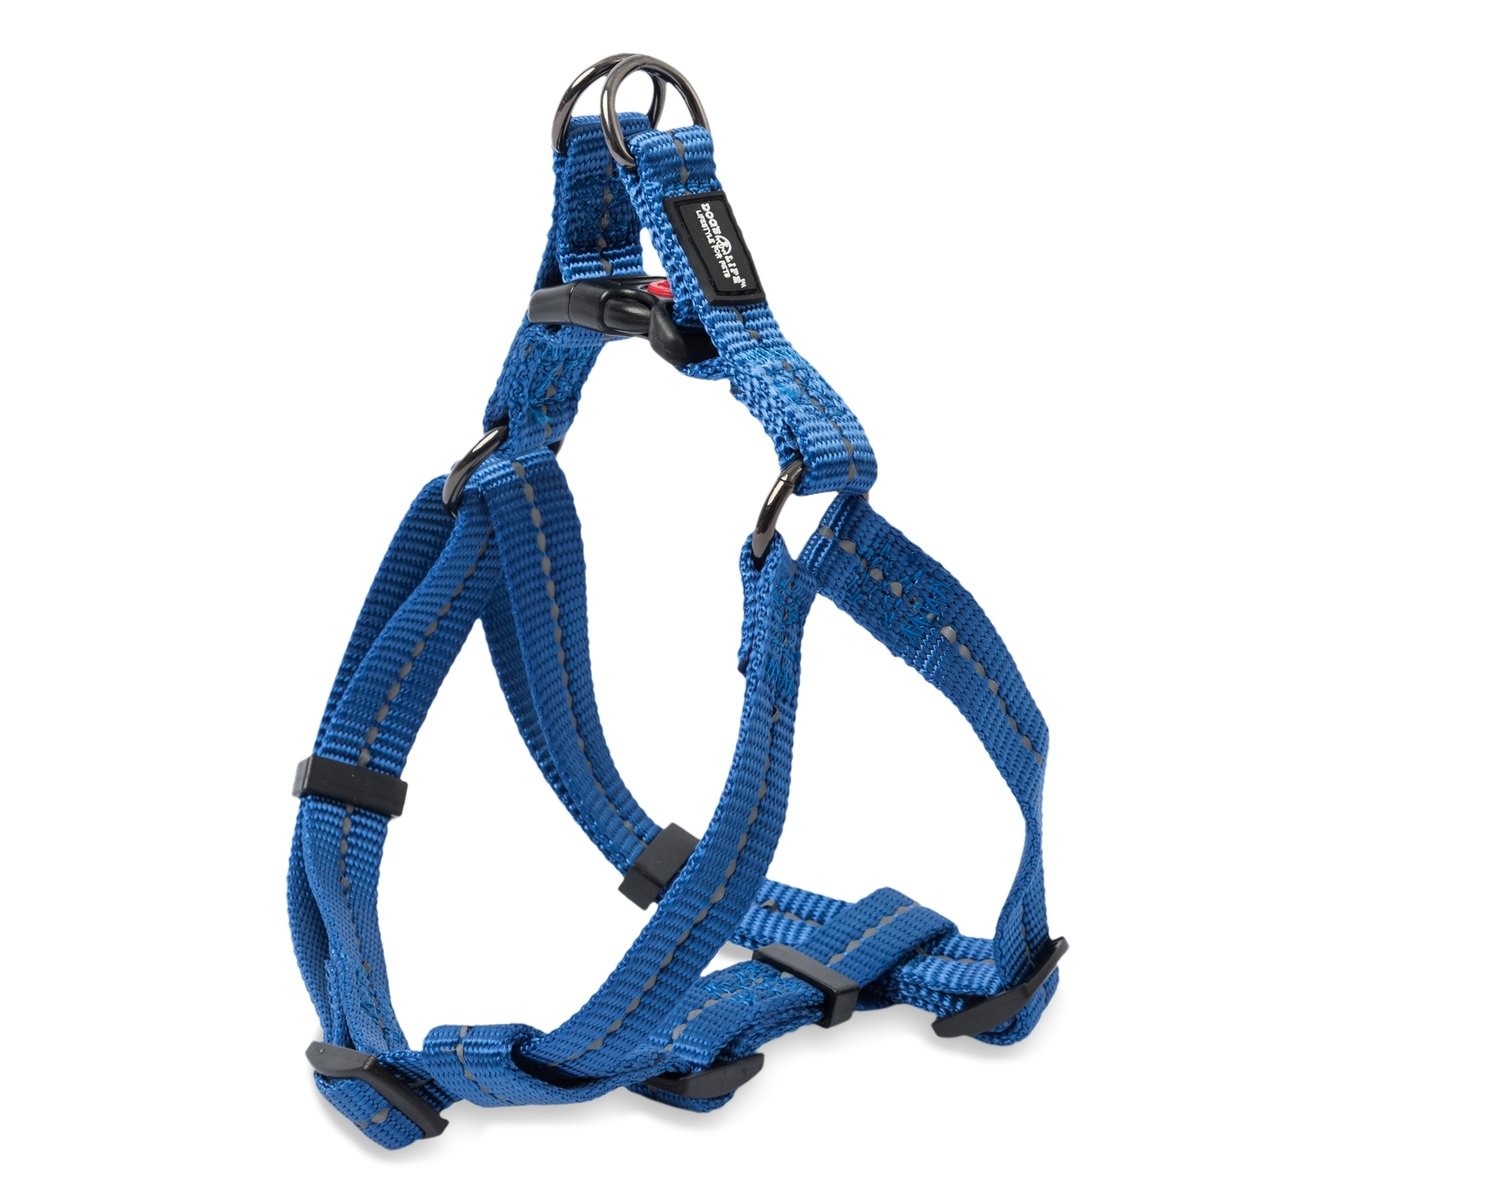 Dog's Life Step In Harness